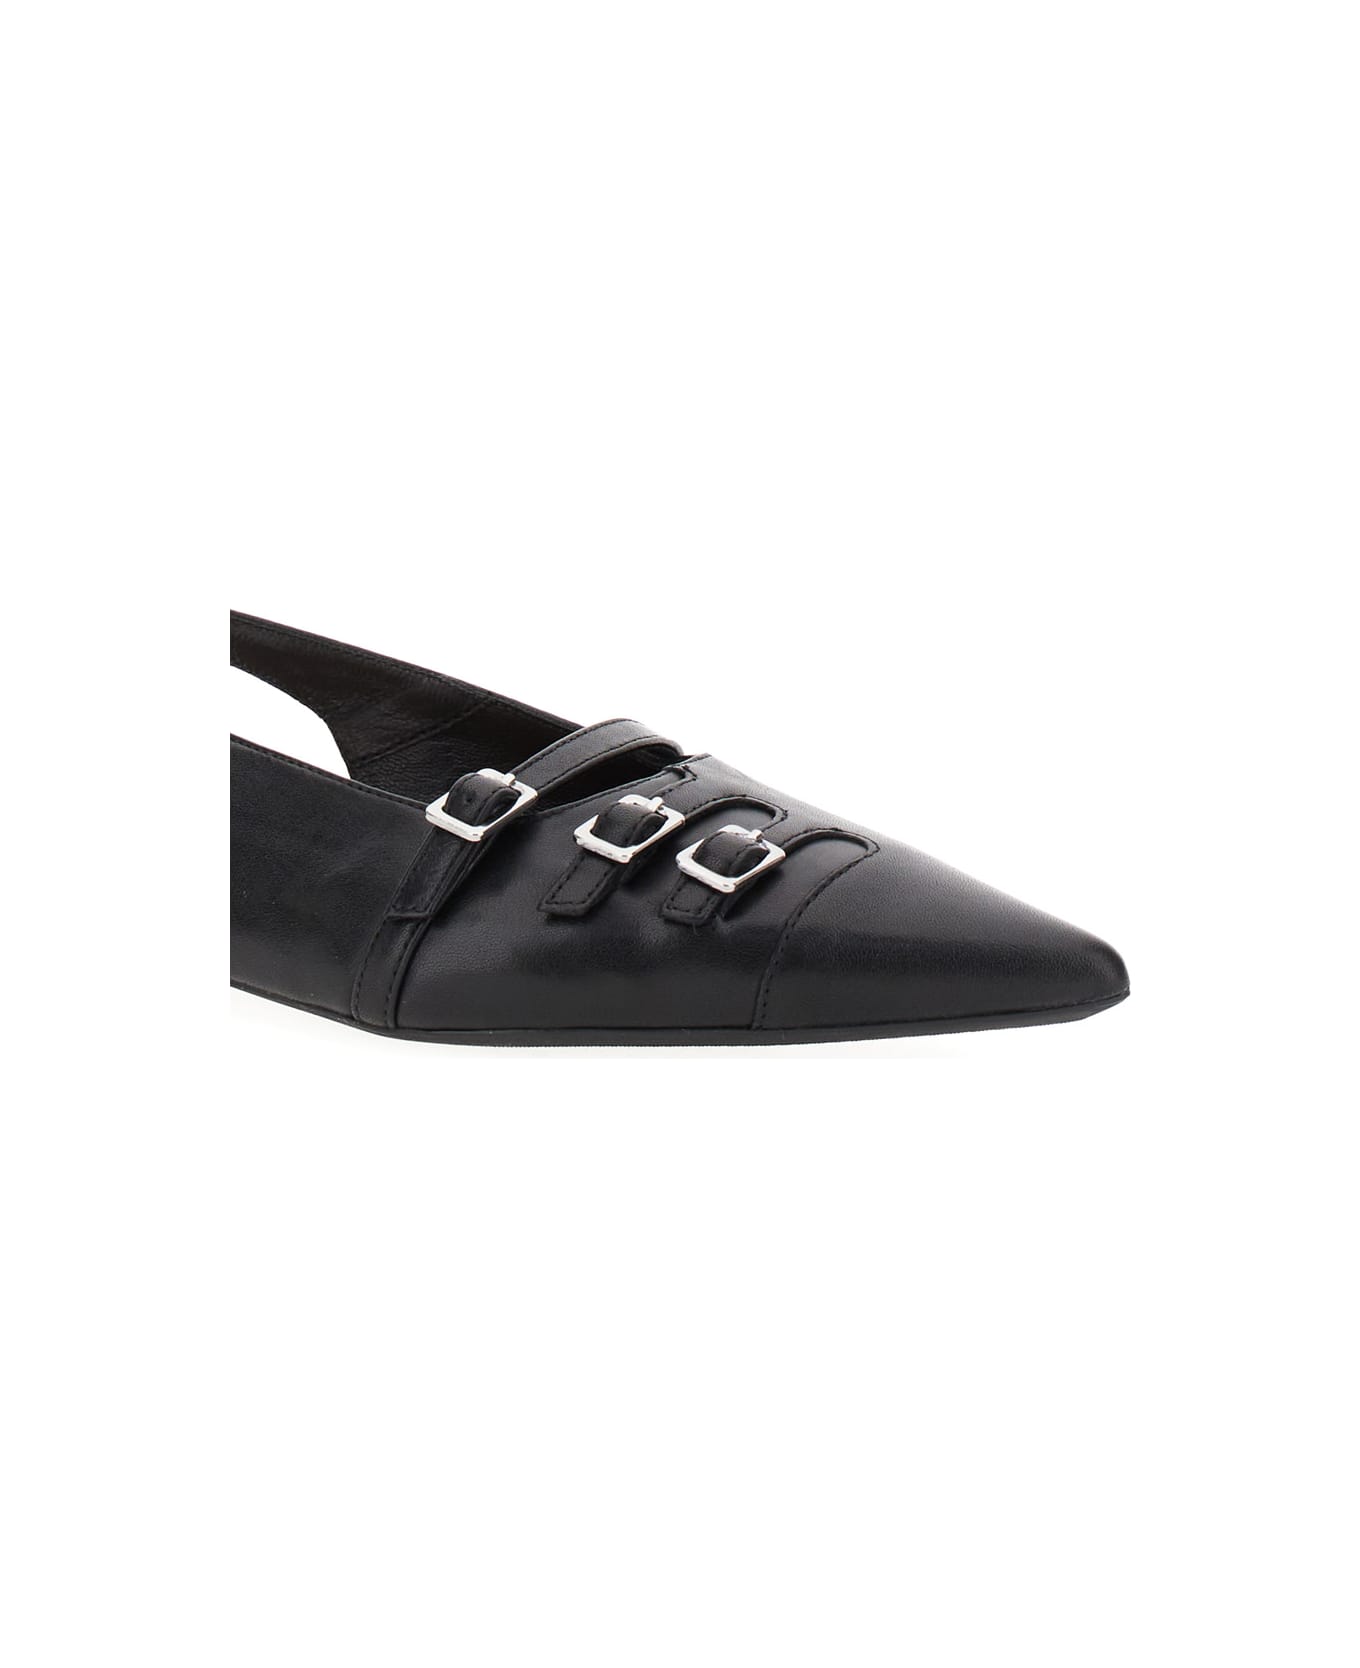 Vagabond 'hermine' Black Slingback Ballet Flats With Decorative Buckles In Leather Woman - Black フラットシューズ